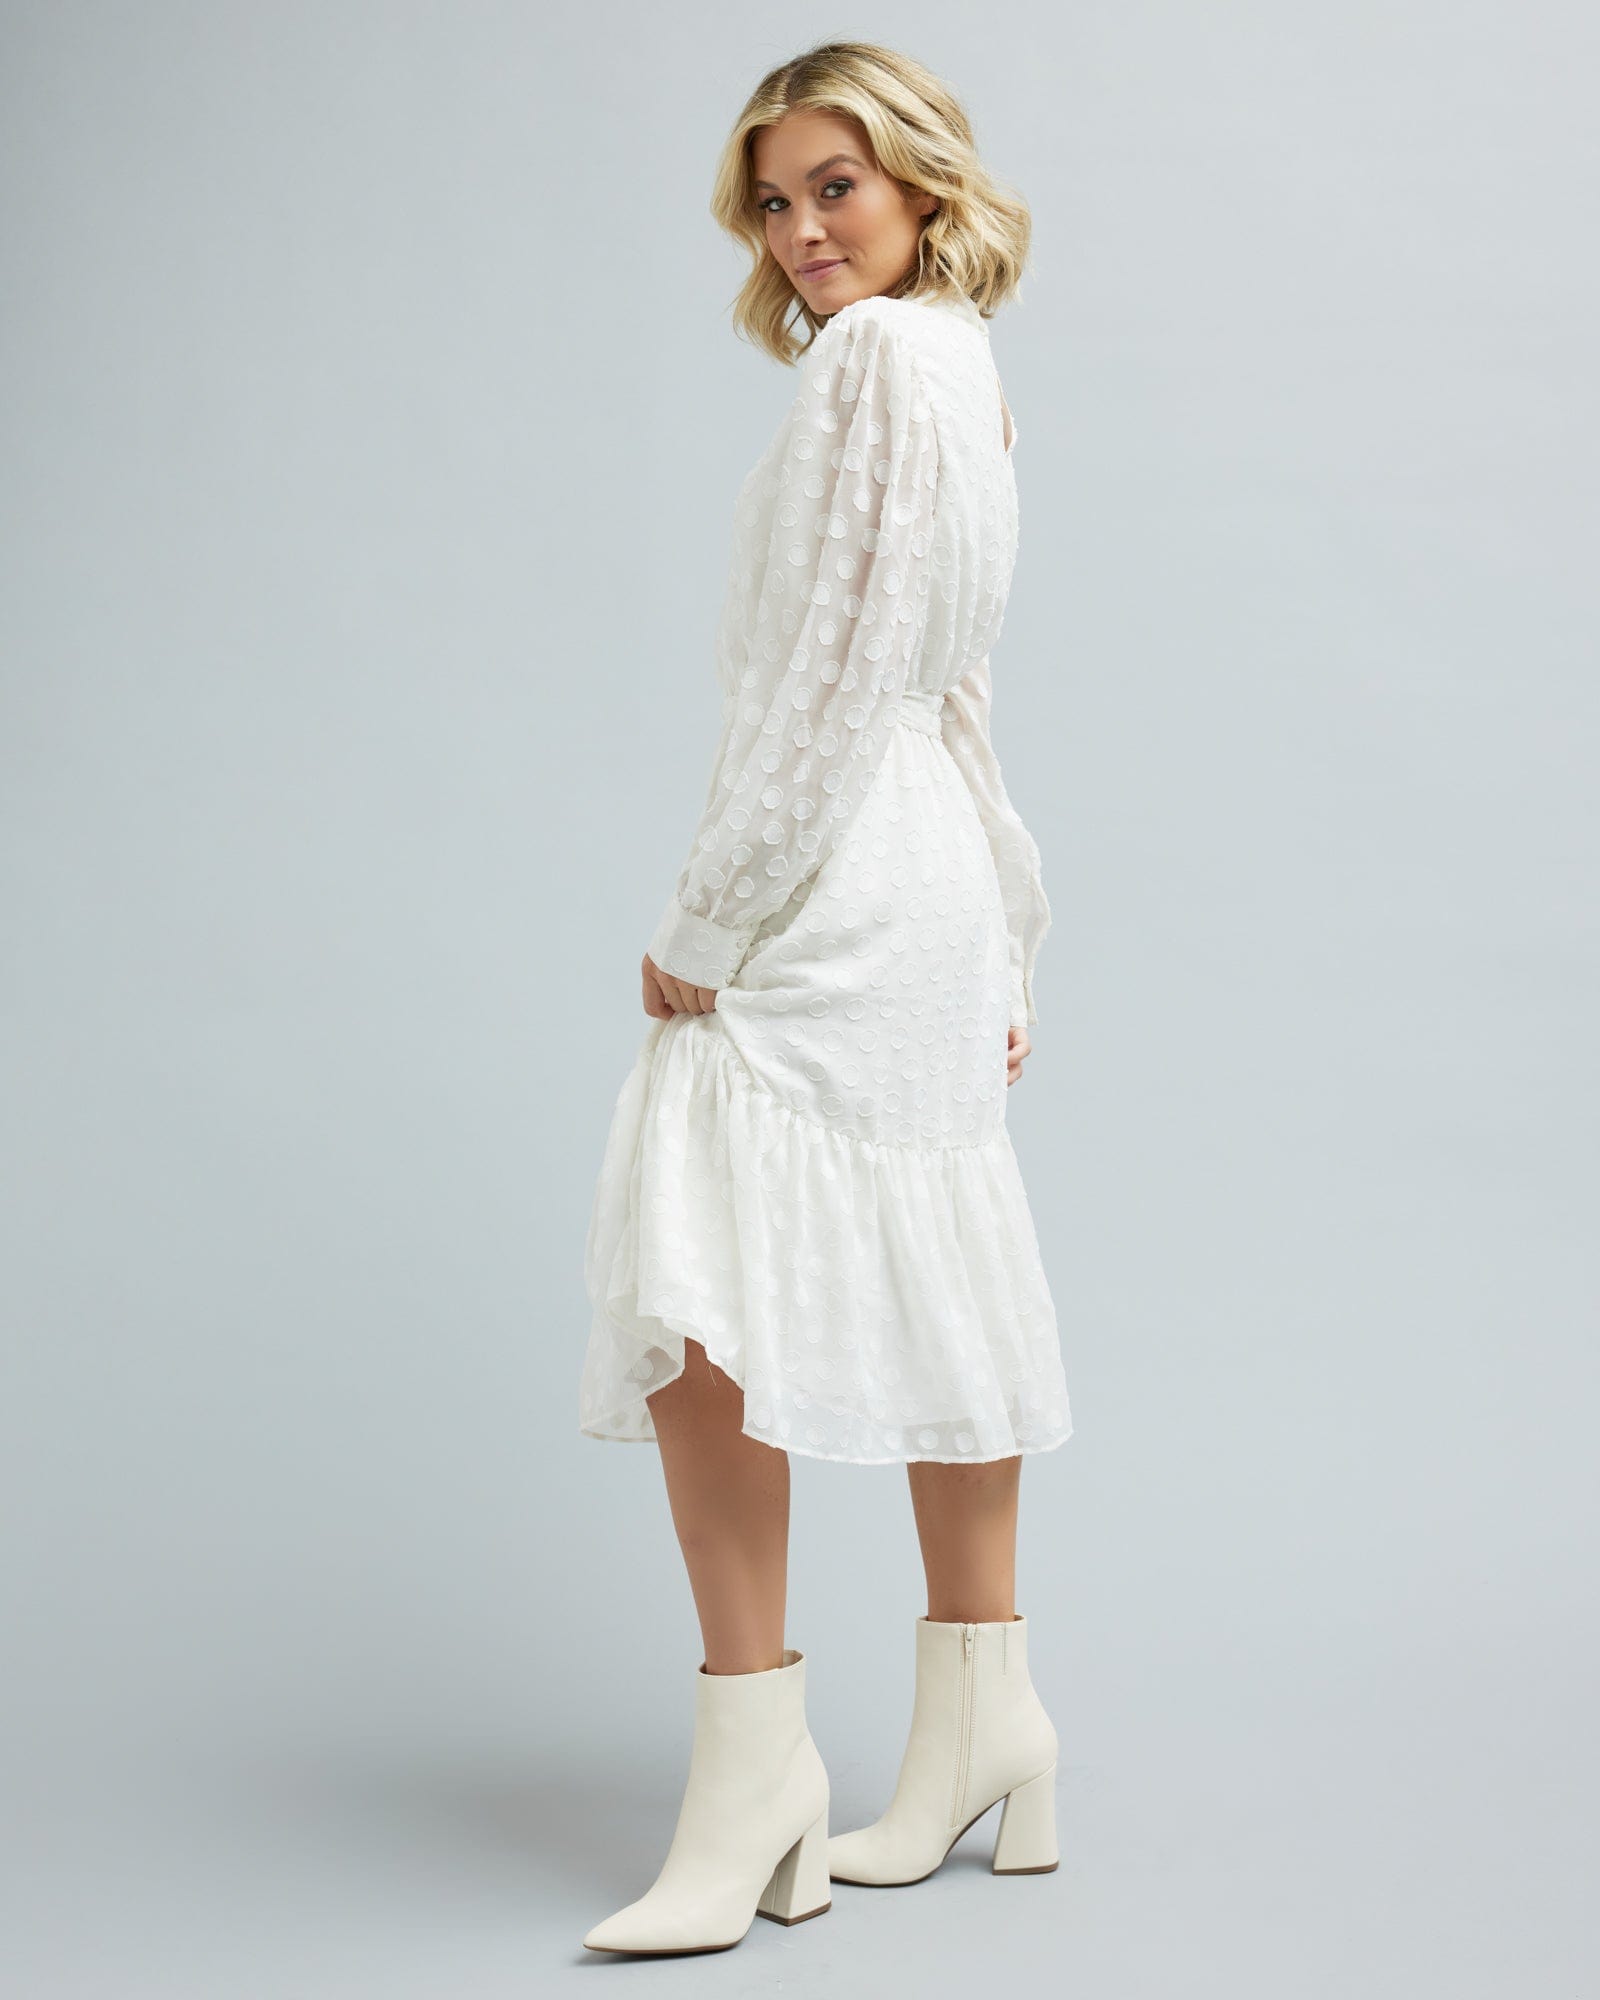 Woman in a long sleeve, white, midi length dress with white polka dots